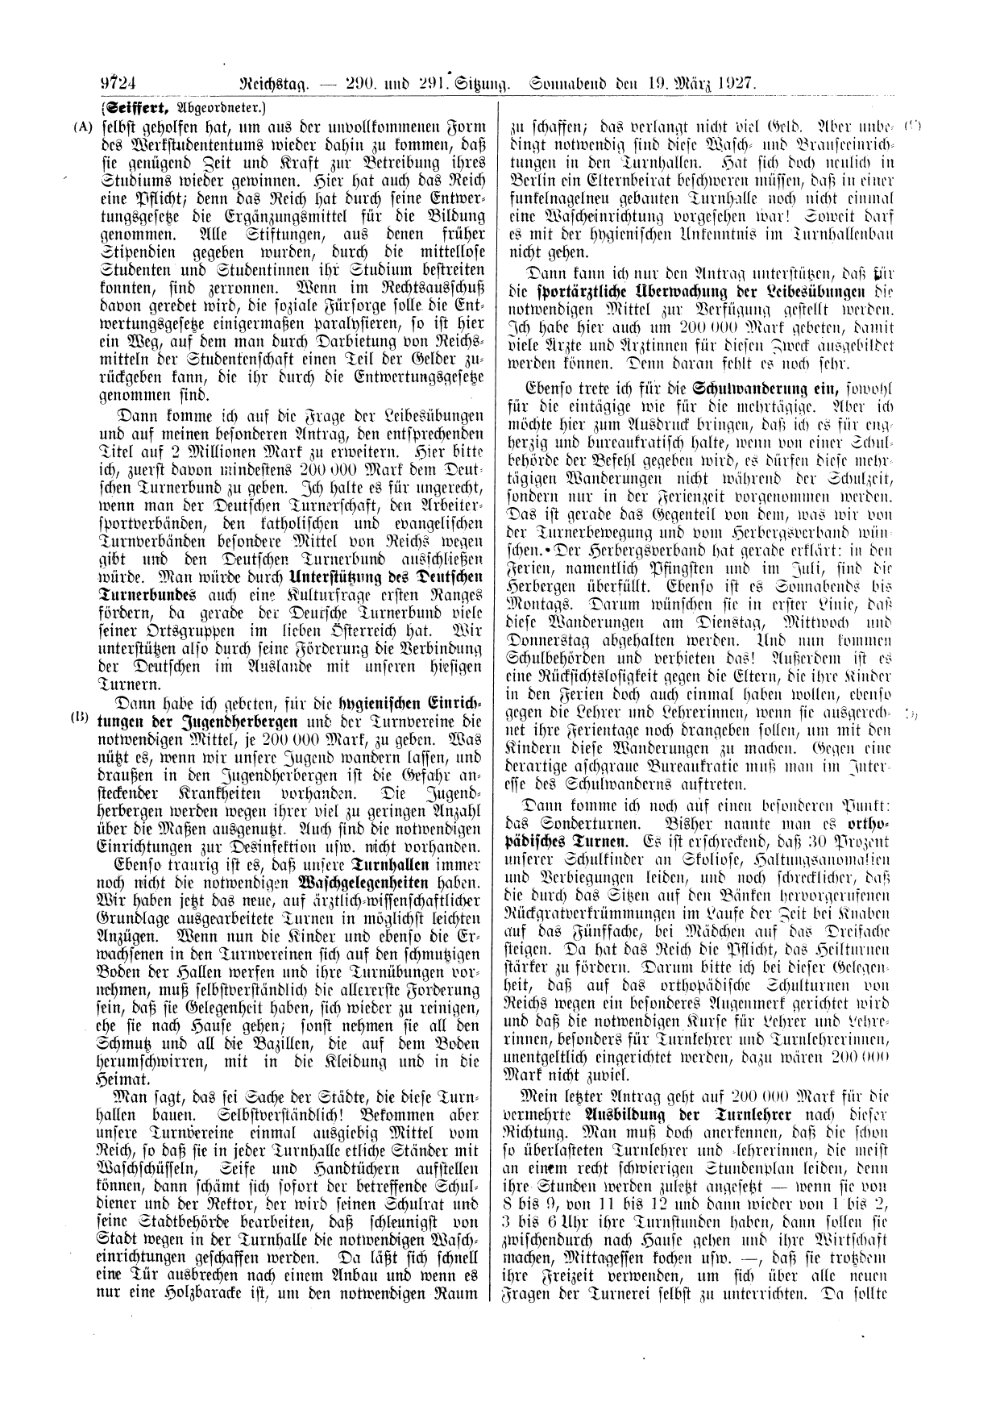 Scan of page 9724